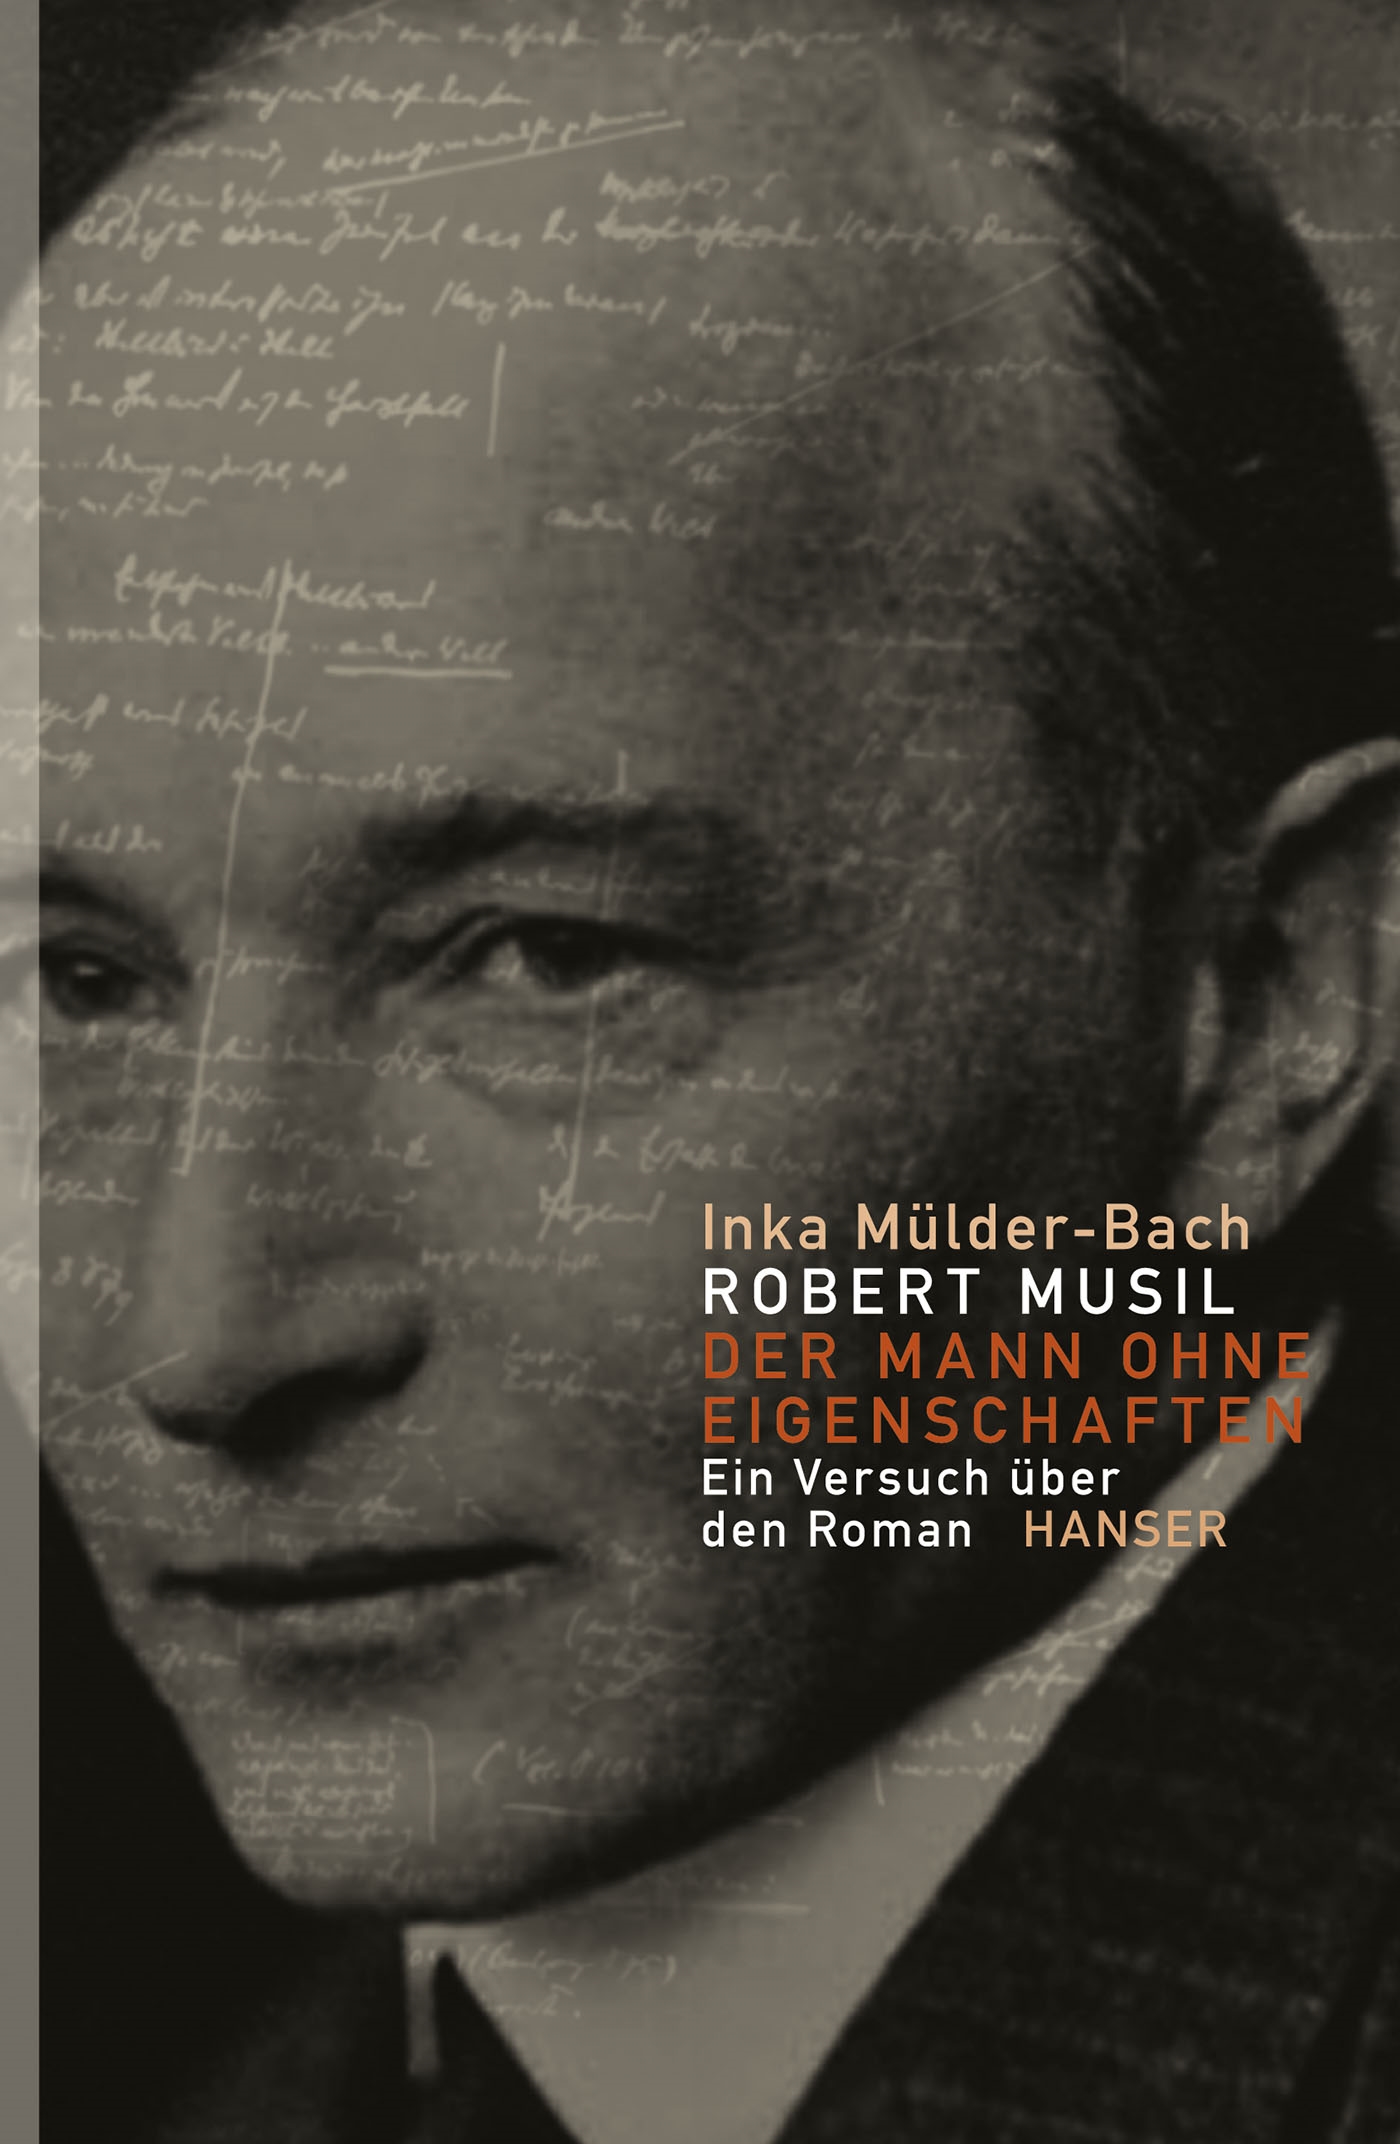 Robert Musil and The Man Without Qualities